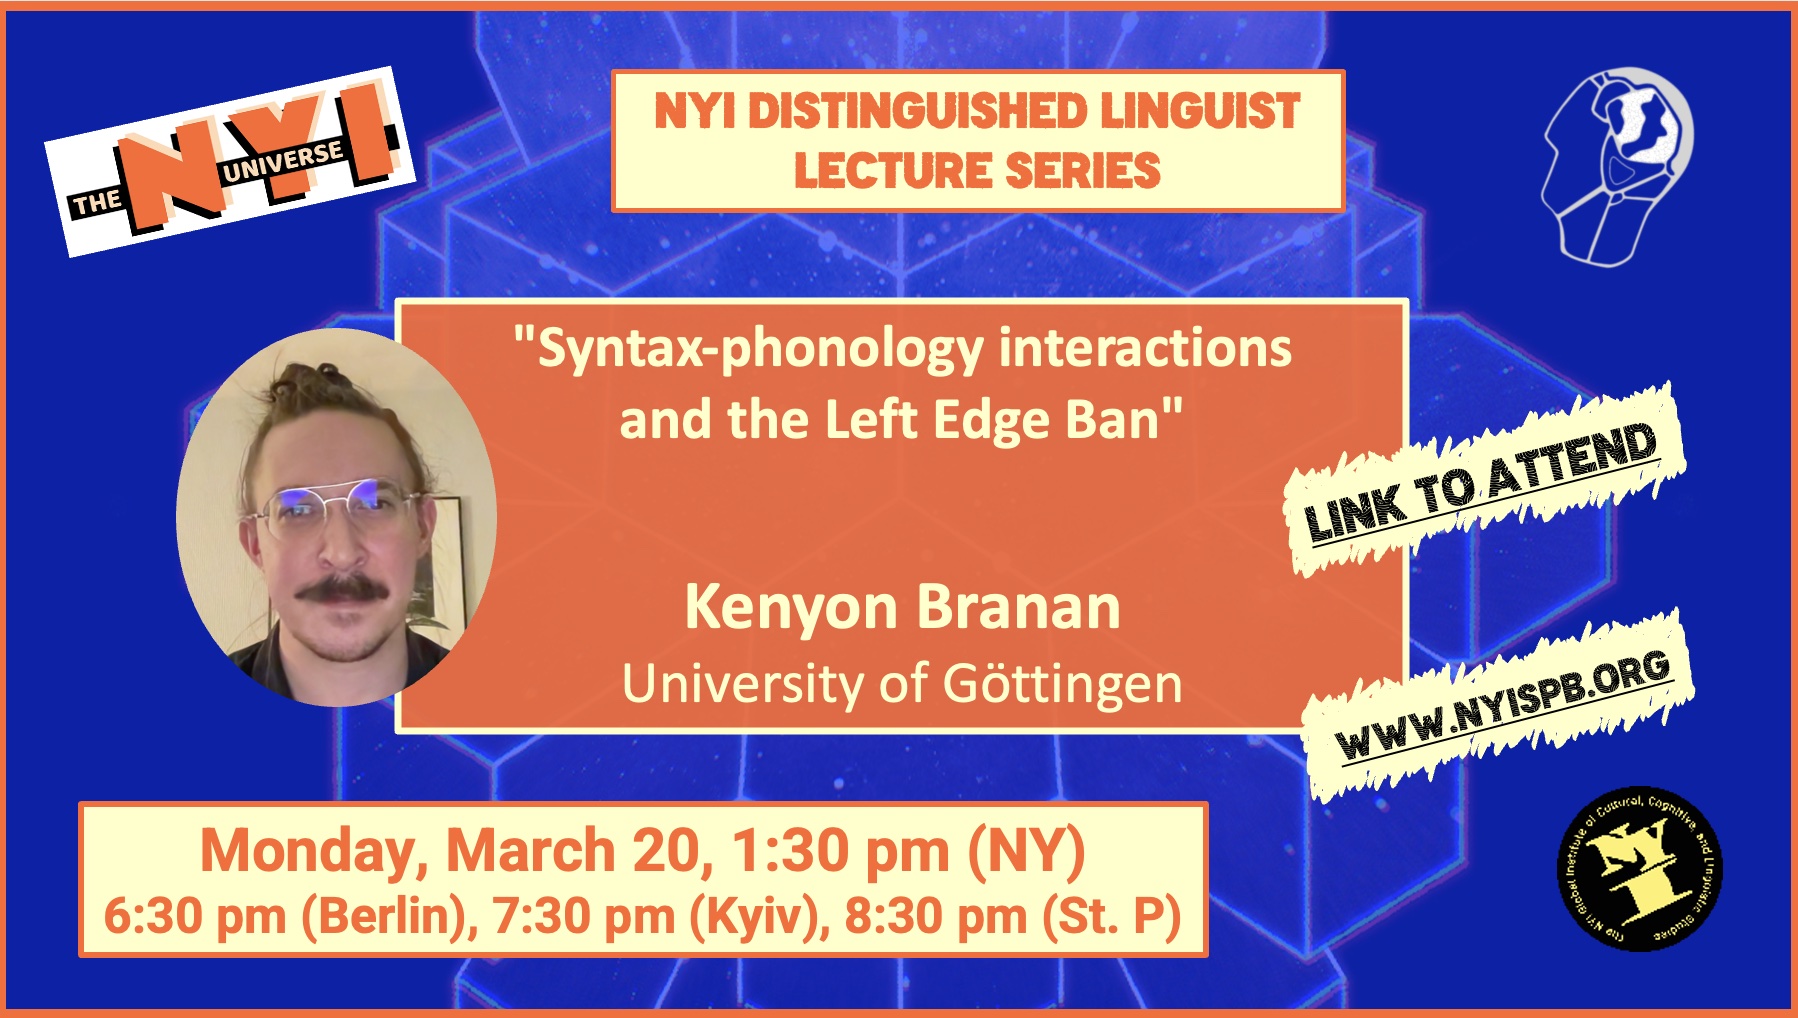 Distinguished Linguist Lecture Series